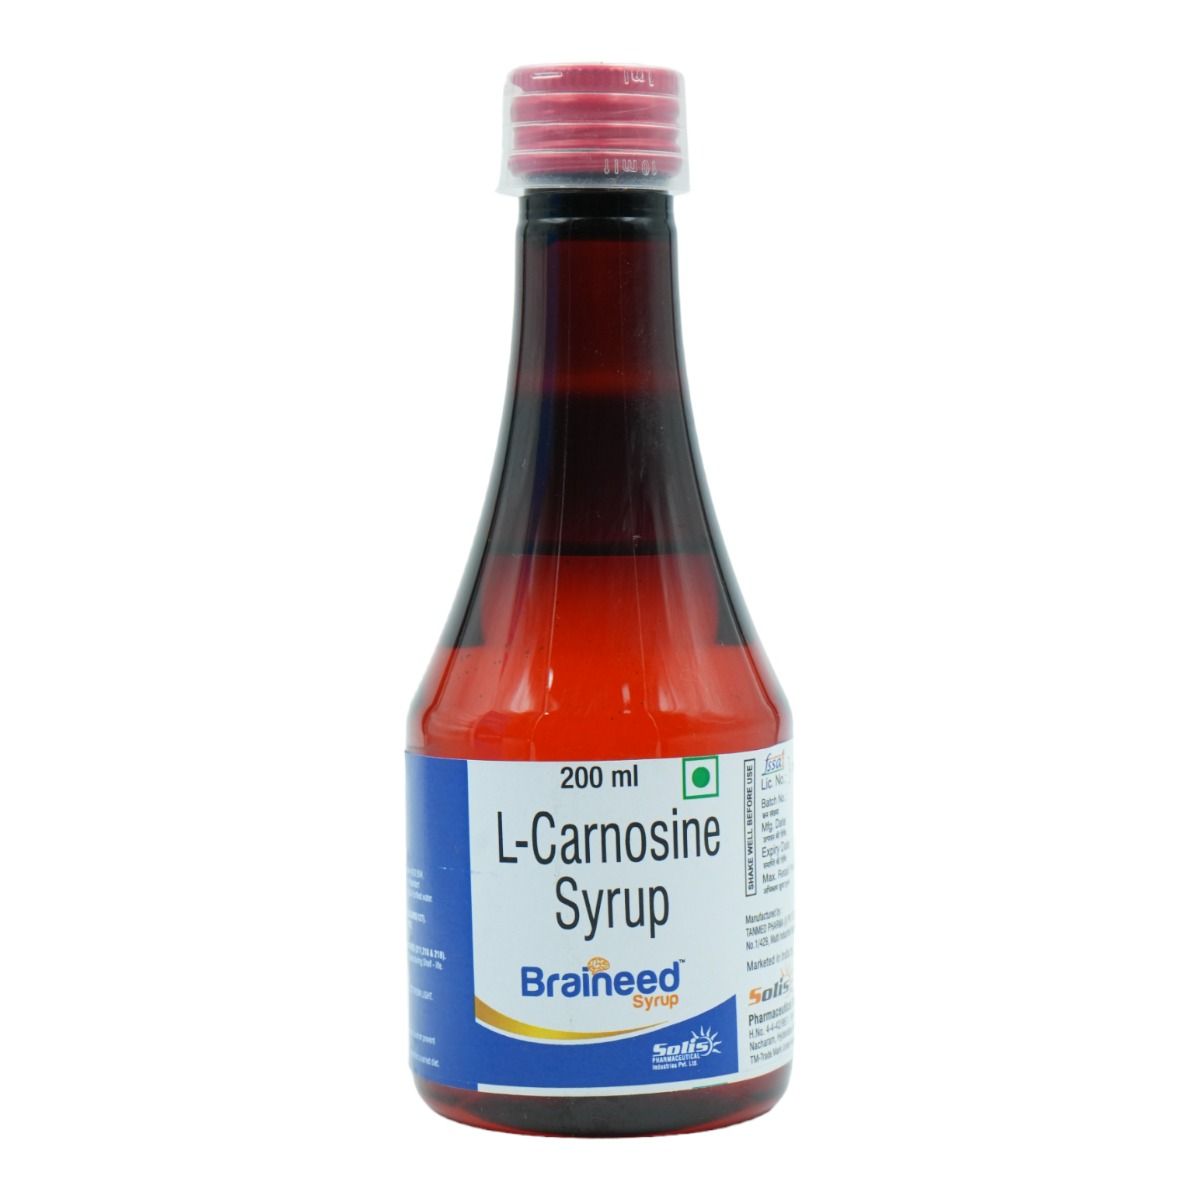 Buy Braineed Syrup 200 ml Online